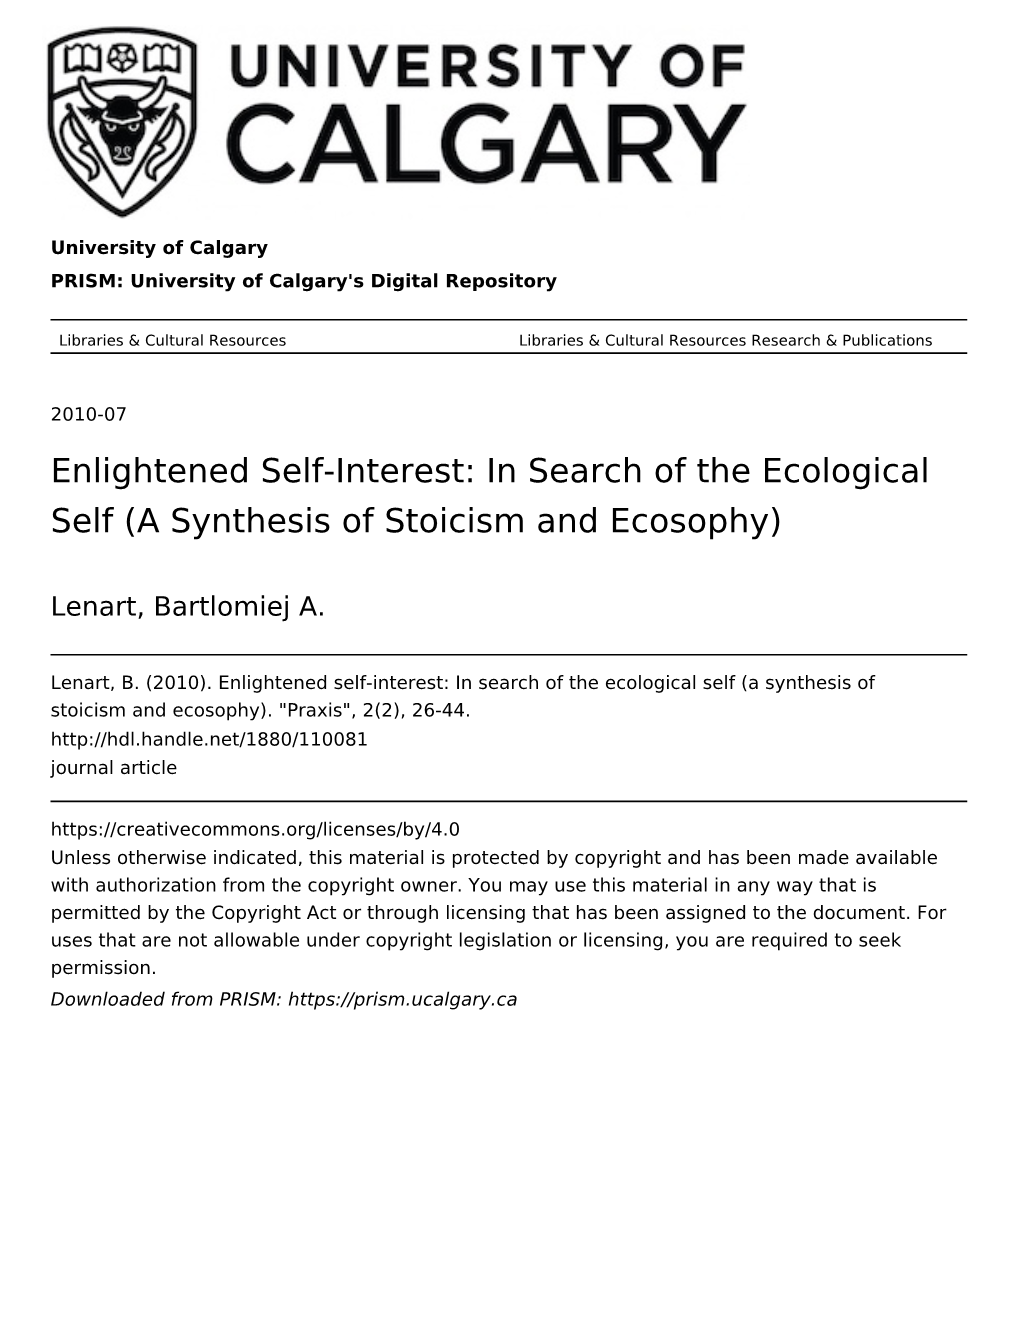 Enlightened Self-Interest: in Search of the Ecological Self (A Synthesis of Stoicism and Ecosophy)